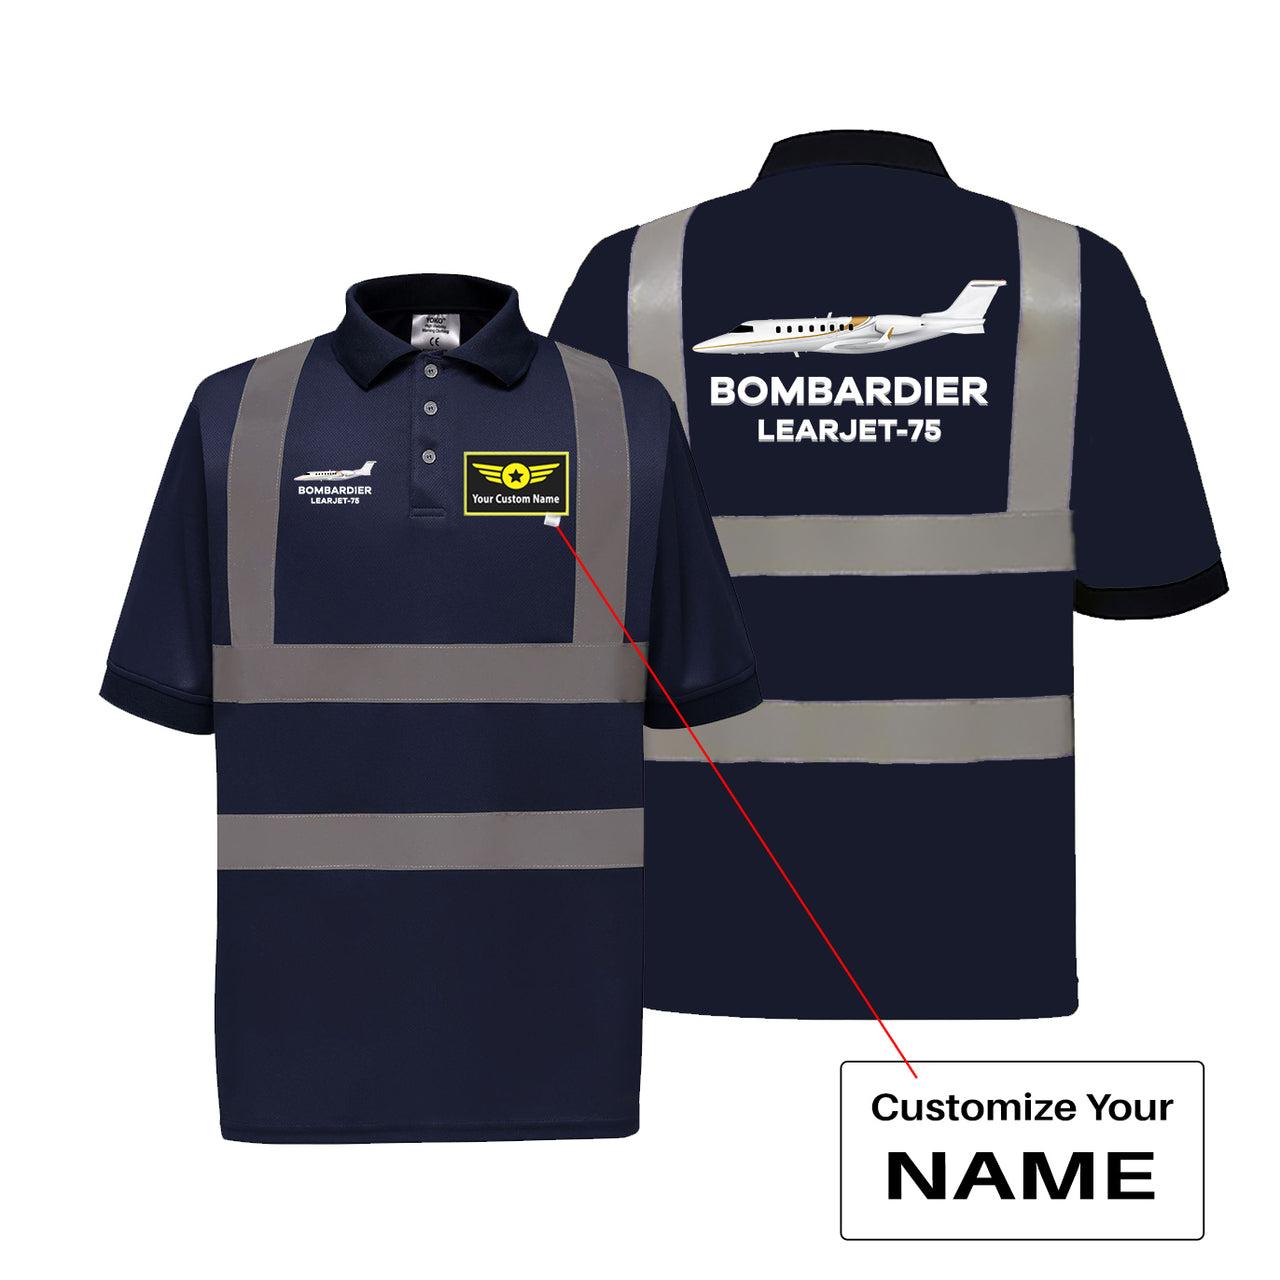 The Bombardier Learjet 75 Designed Reflective Polo T-Shirts